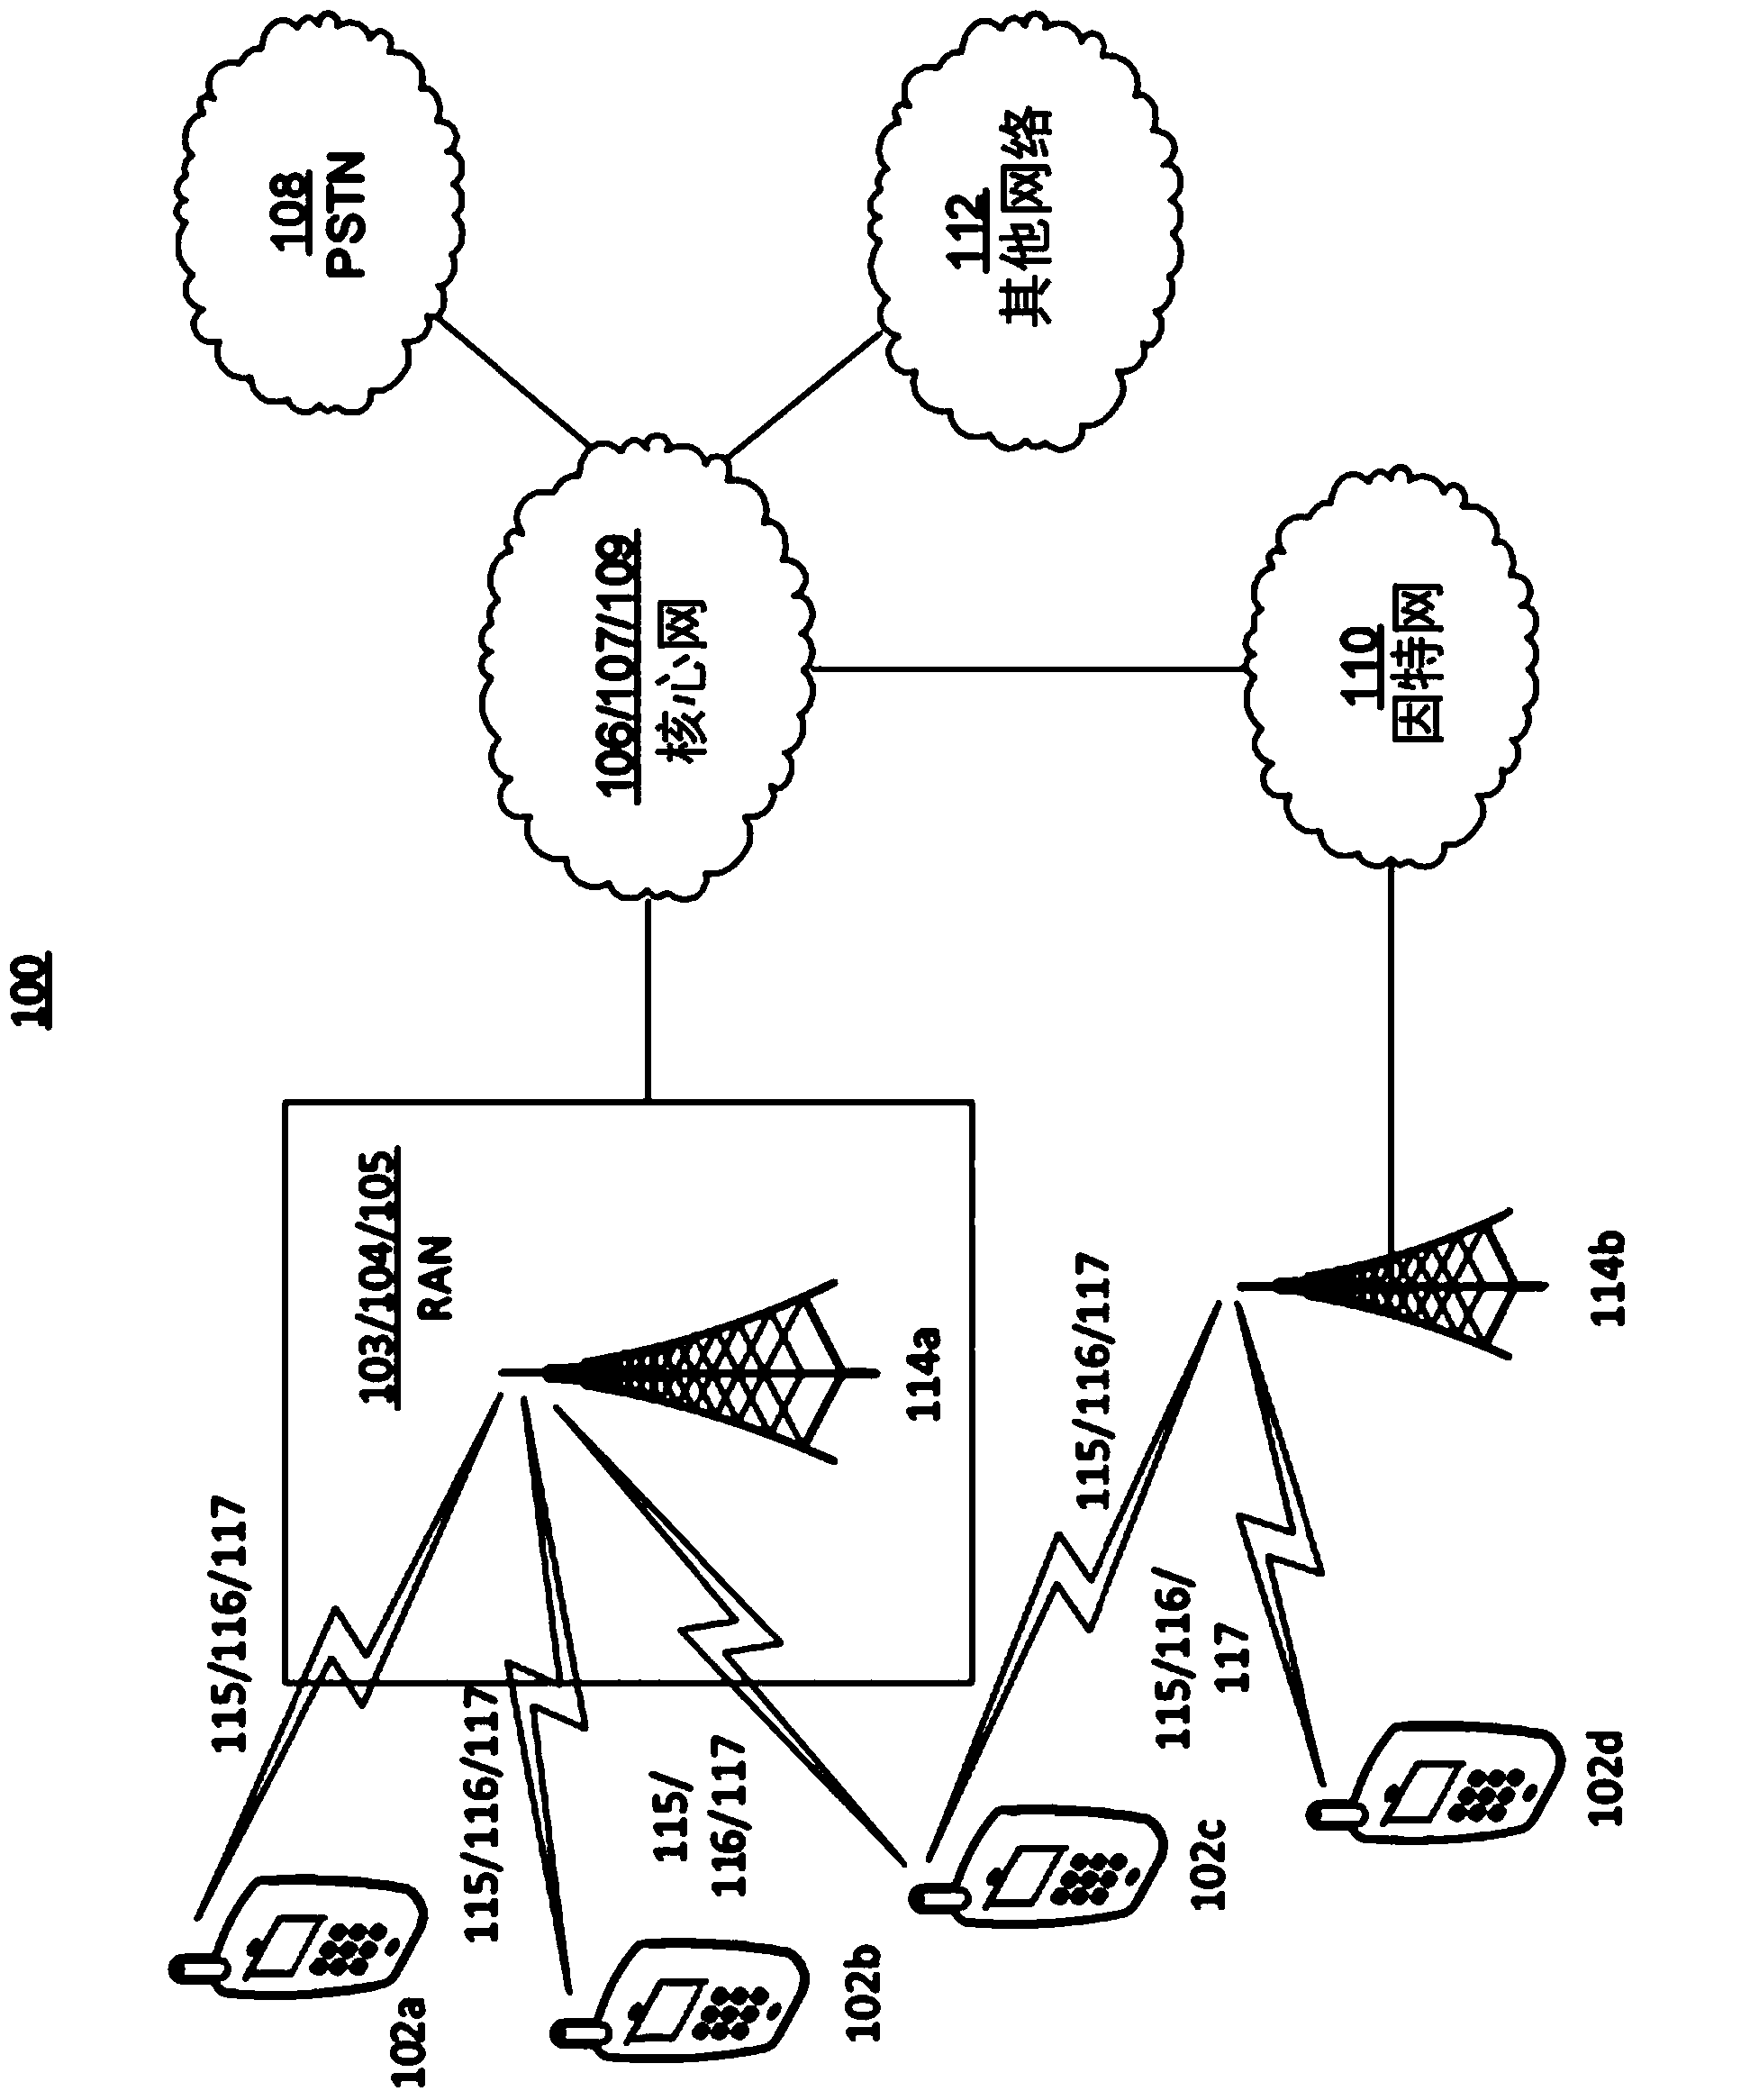 Device communication using a reduced channel bandwidth